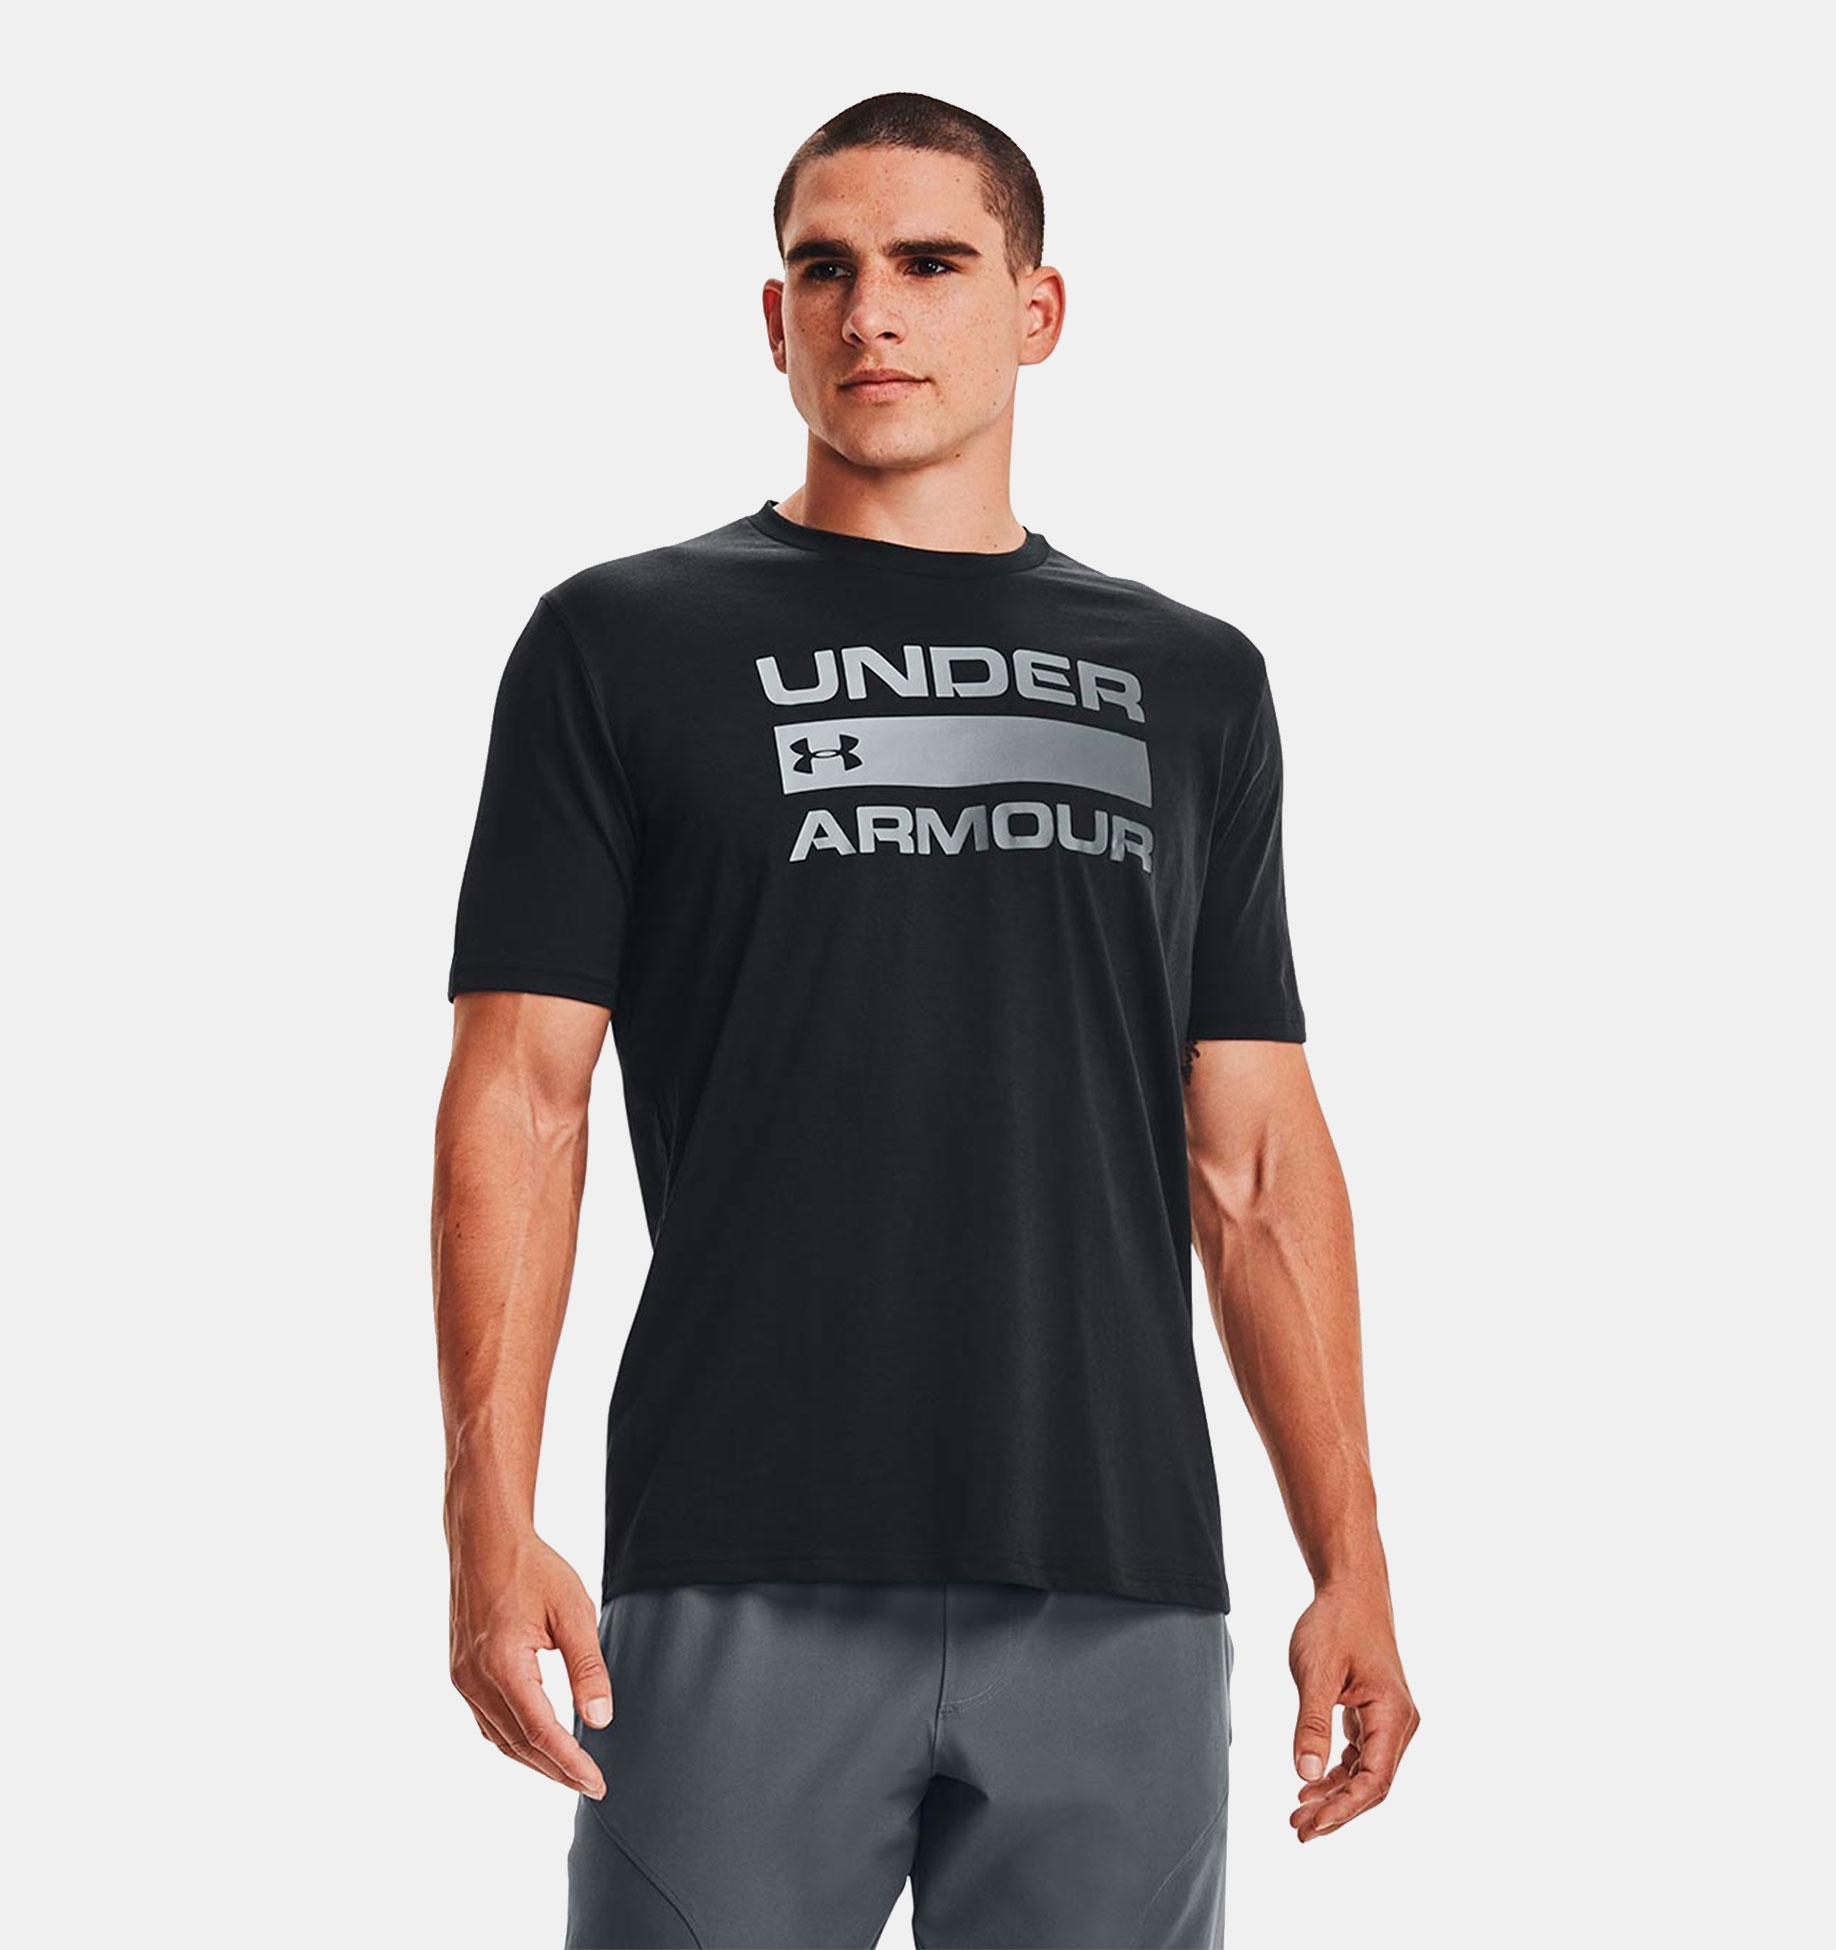 https://www.underarmour.com.ar/on/demandware.static/-/Sites-underarmour_staging/default/dwec2a9f85/new_images/1359313/1359313-1.jpeg